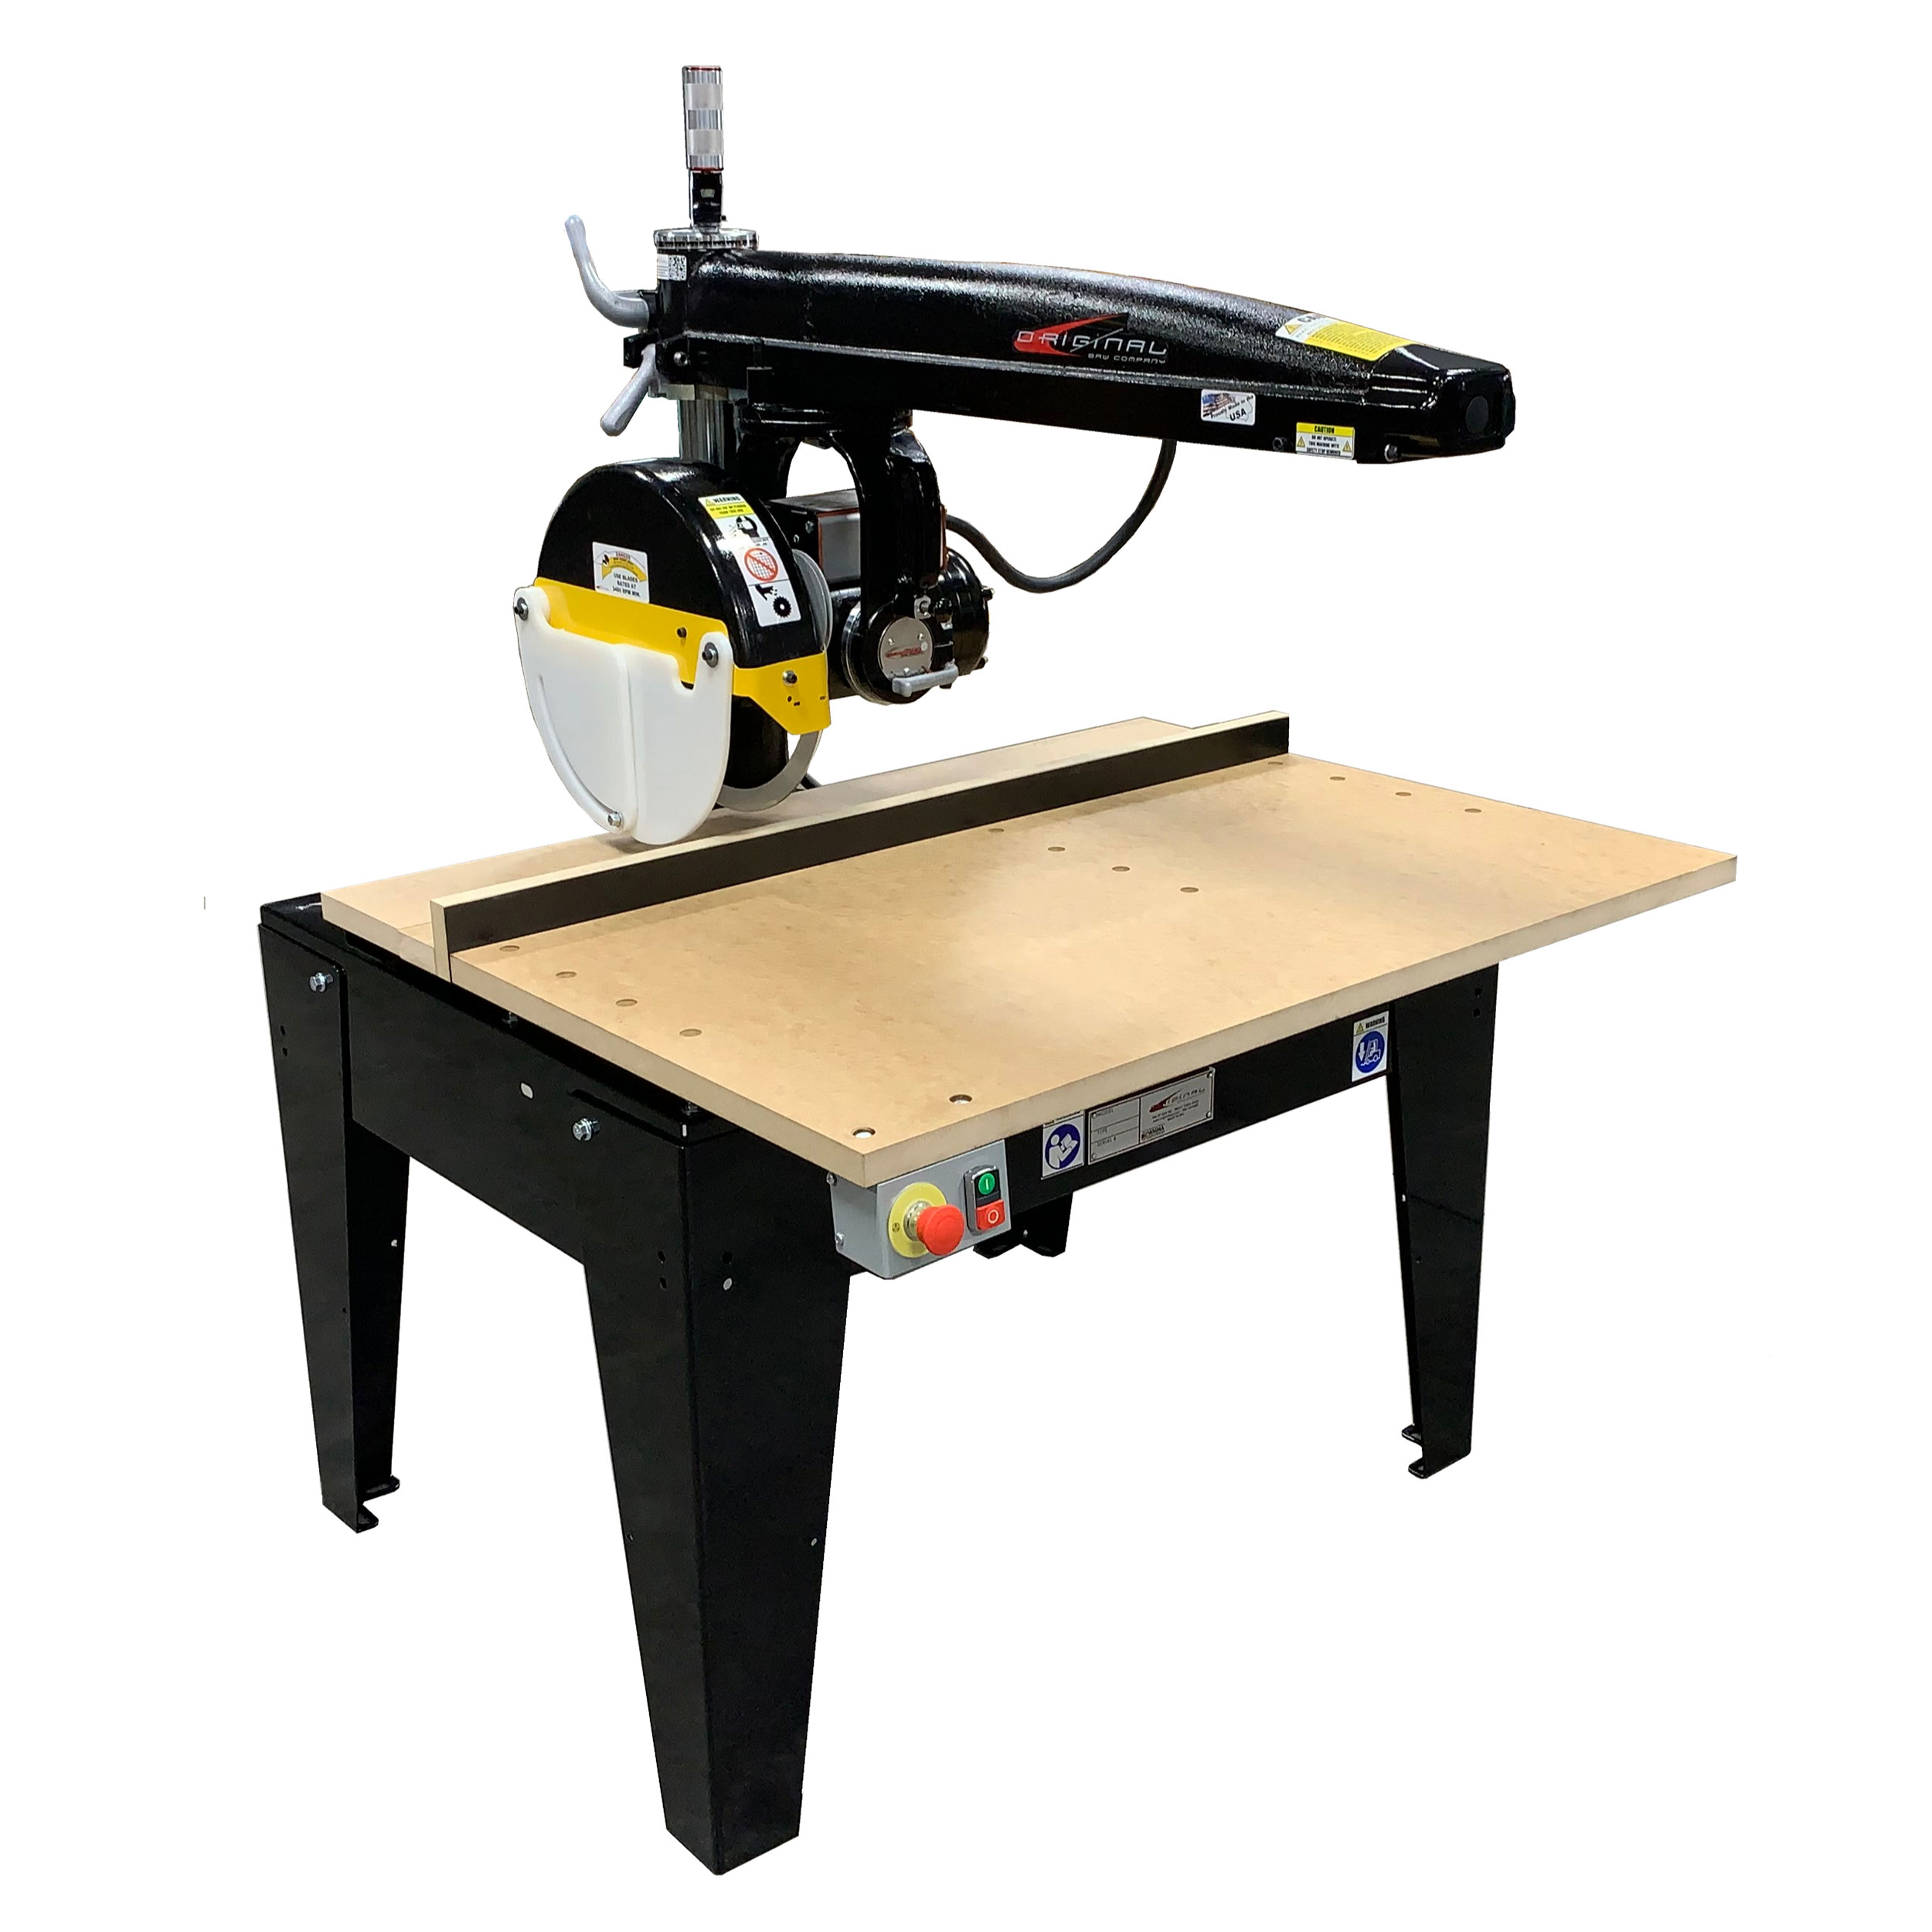 Radial Arm Saw With 14" Blade And 24" Crosscut, 3hp 1 Phase 208/230v